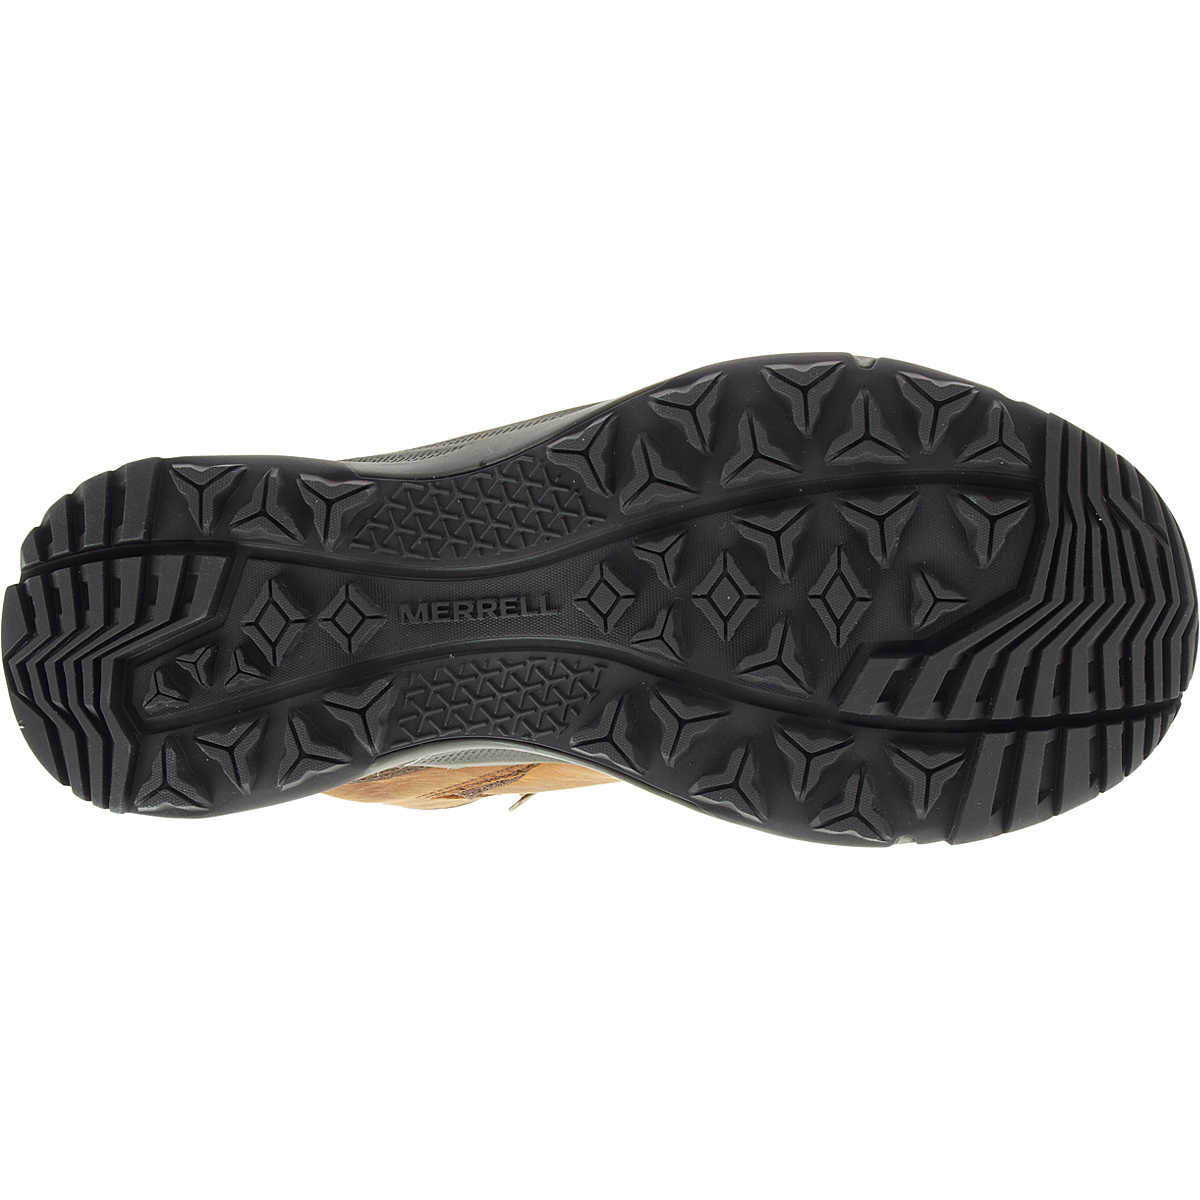 Removable Contoured Kinetic Fit™ BASE Insole - Offers flexible support and shock absorption.